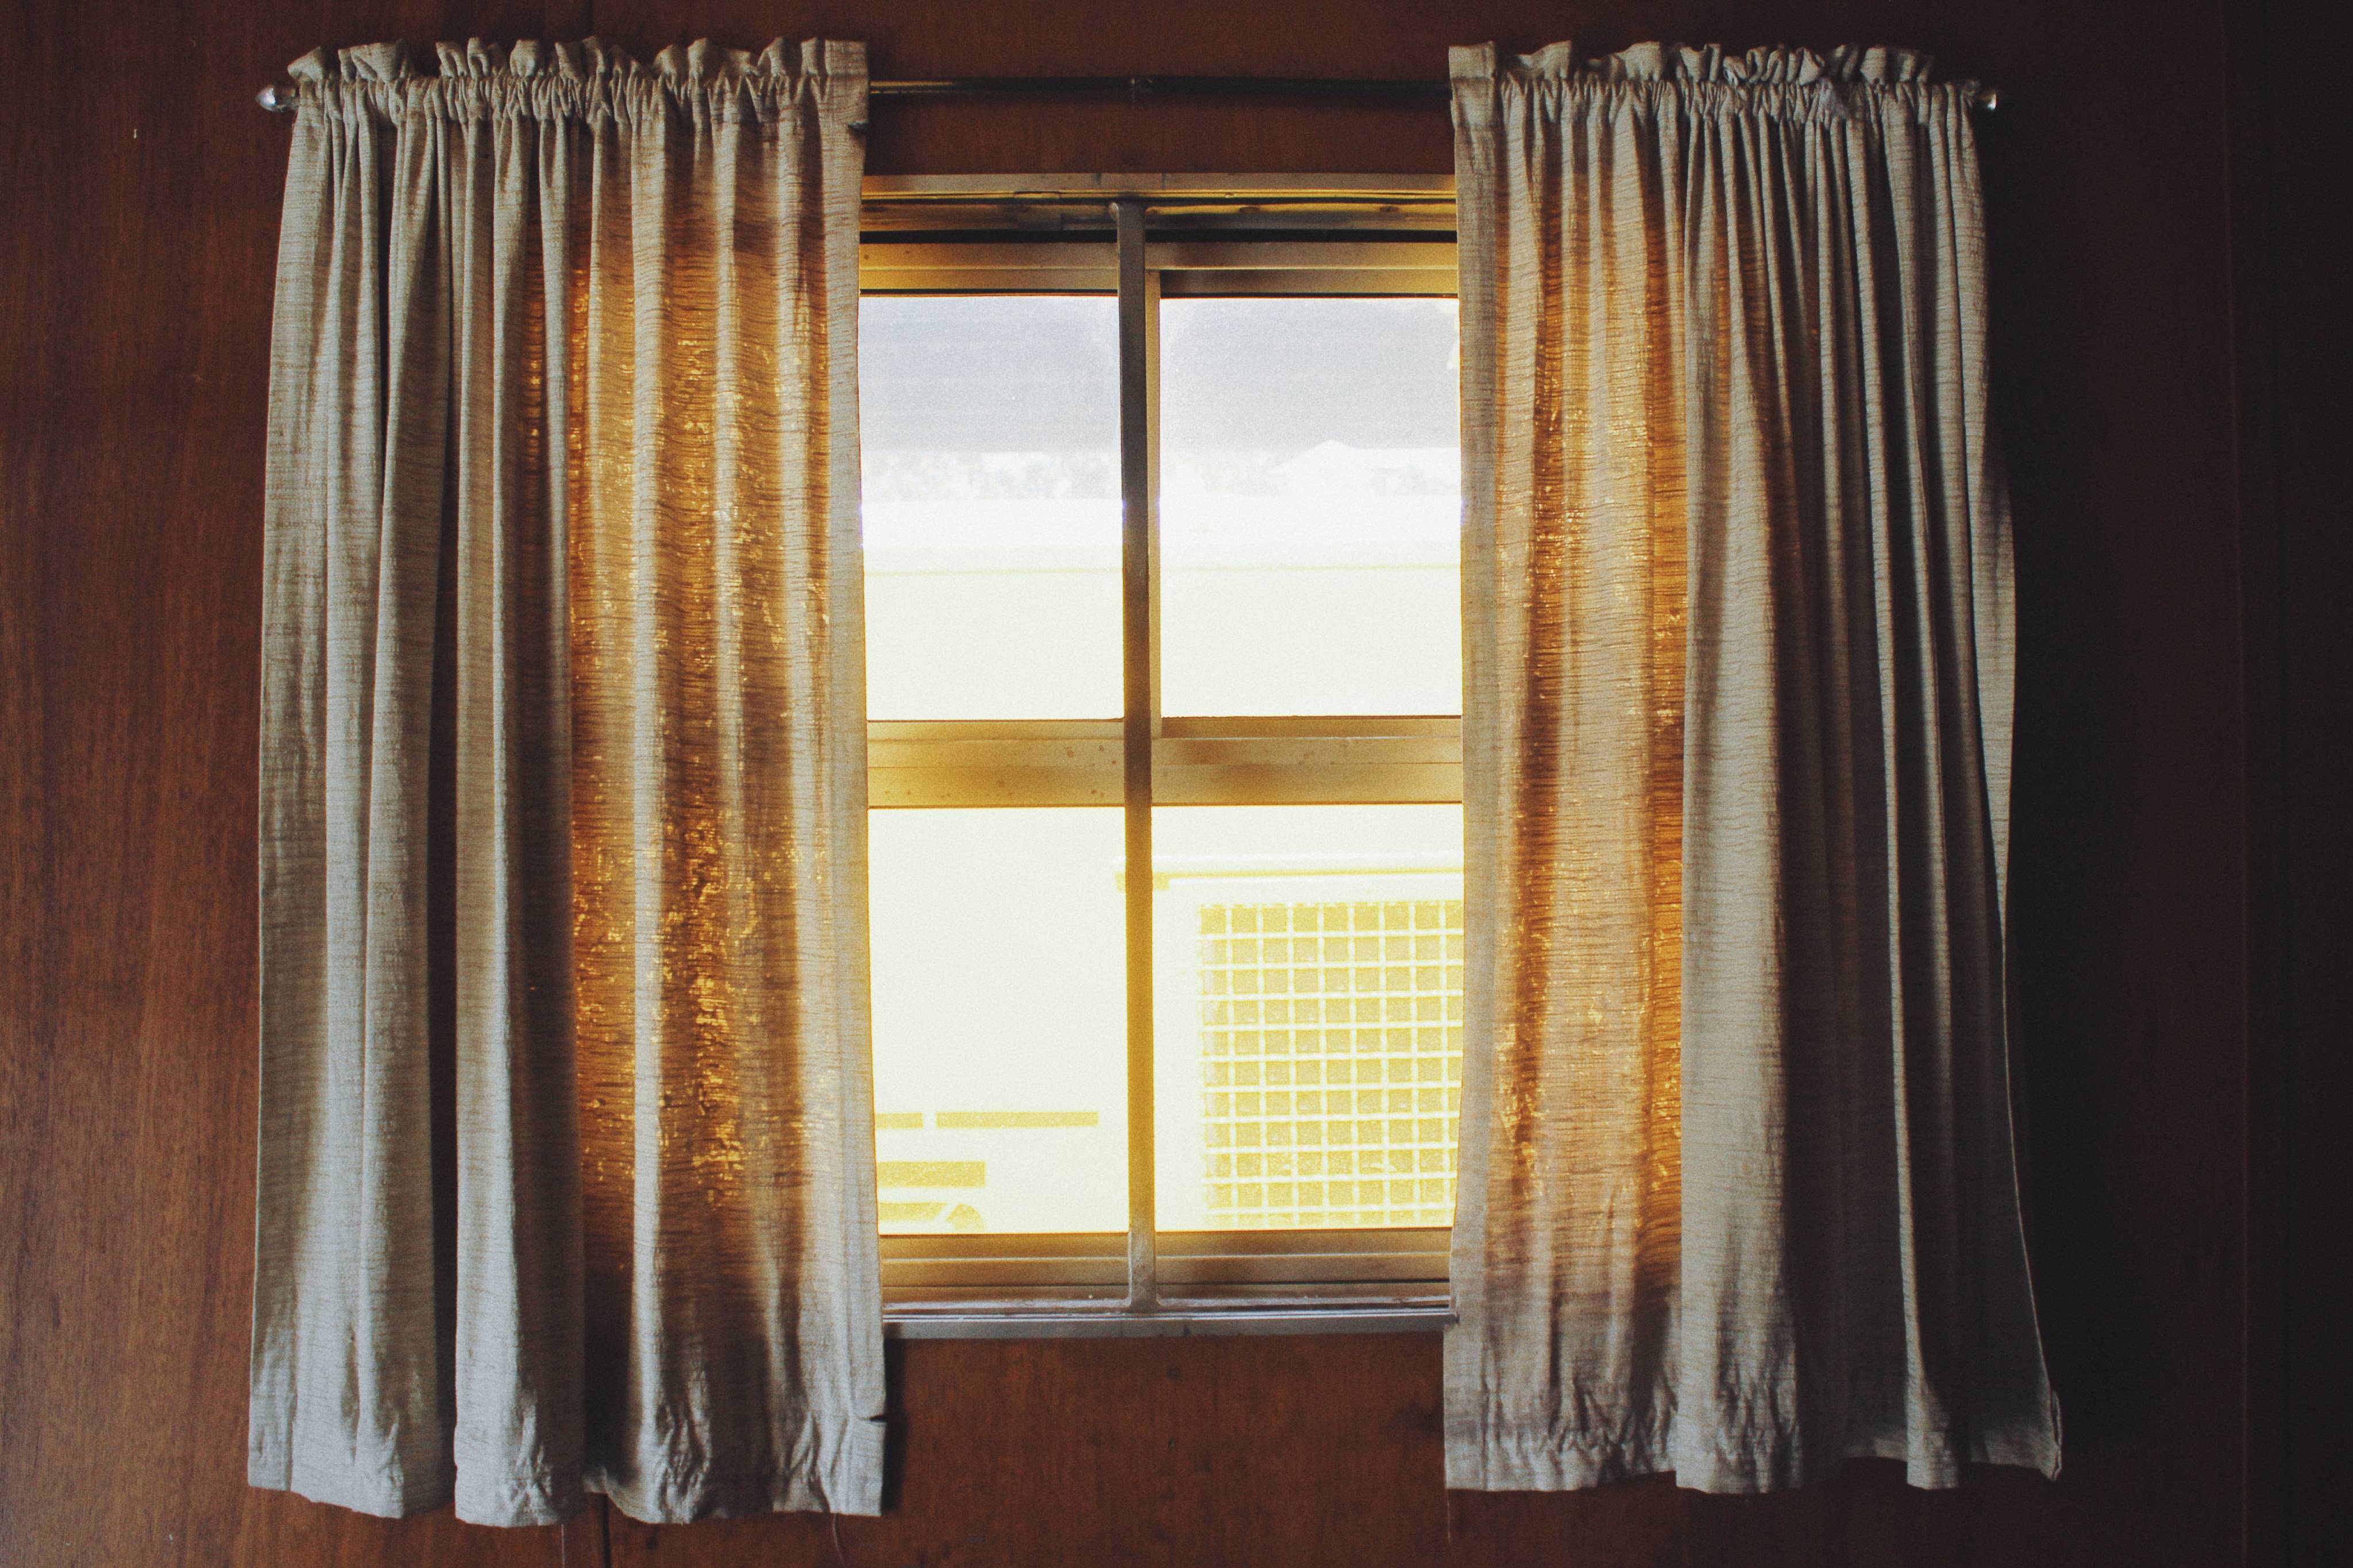 Organic Cotton Curtains: Why You Should Buy Them for This Summer